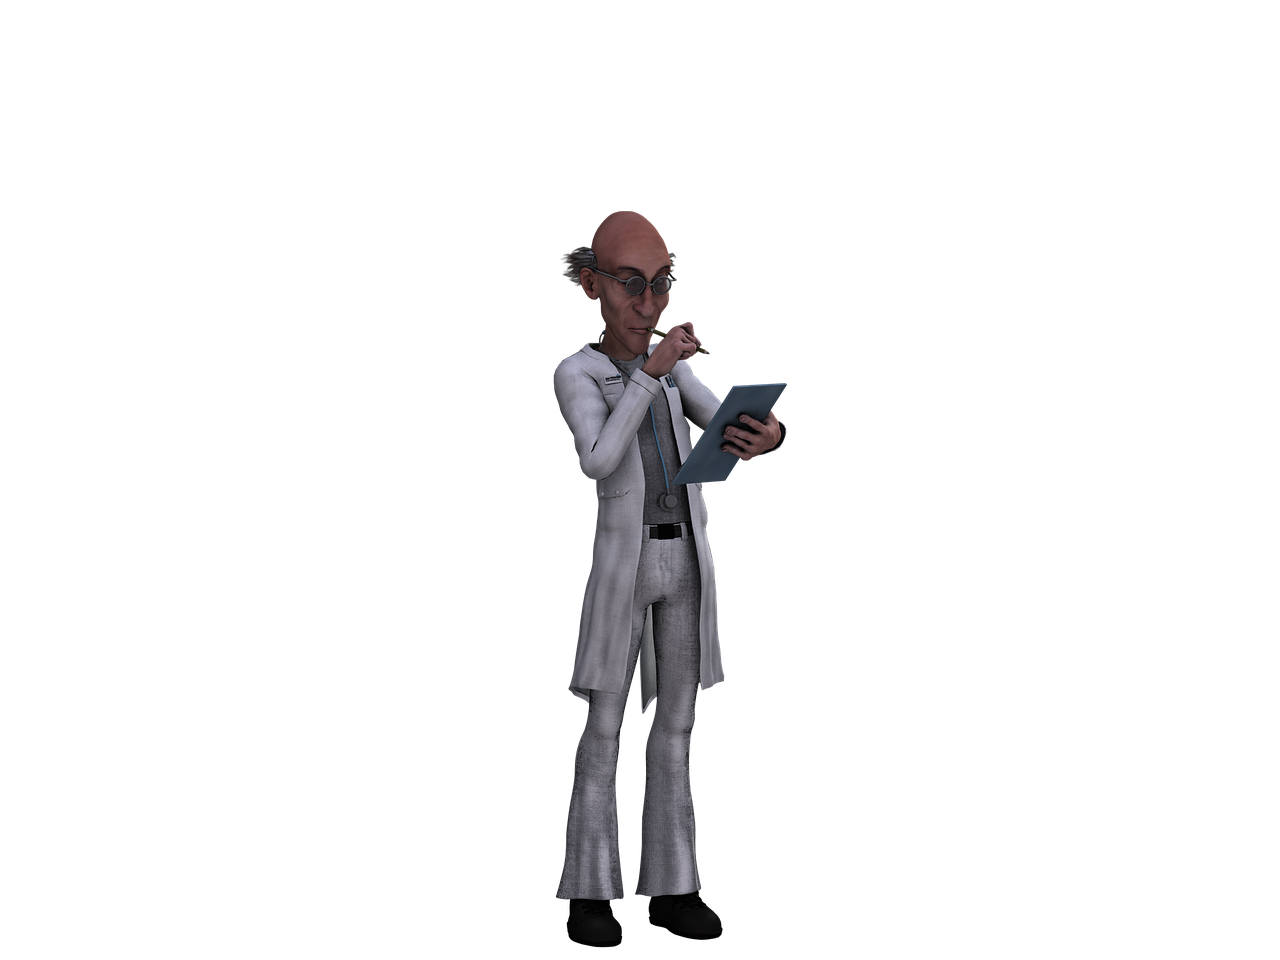 a man in a suit talking on a cell phone, inspired by Dr. Atl, zbrush central contest winner, wearing lab coat and glasses, ingame image, 3 0 0 0 ( dr. john a. zoidberg ), cutscene